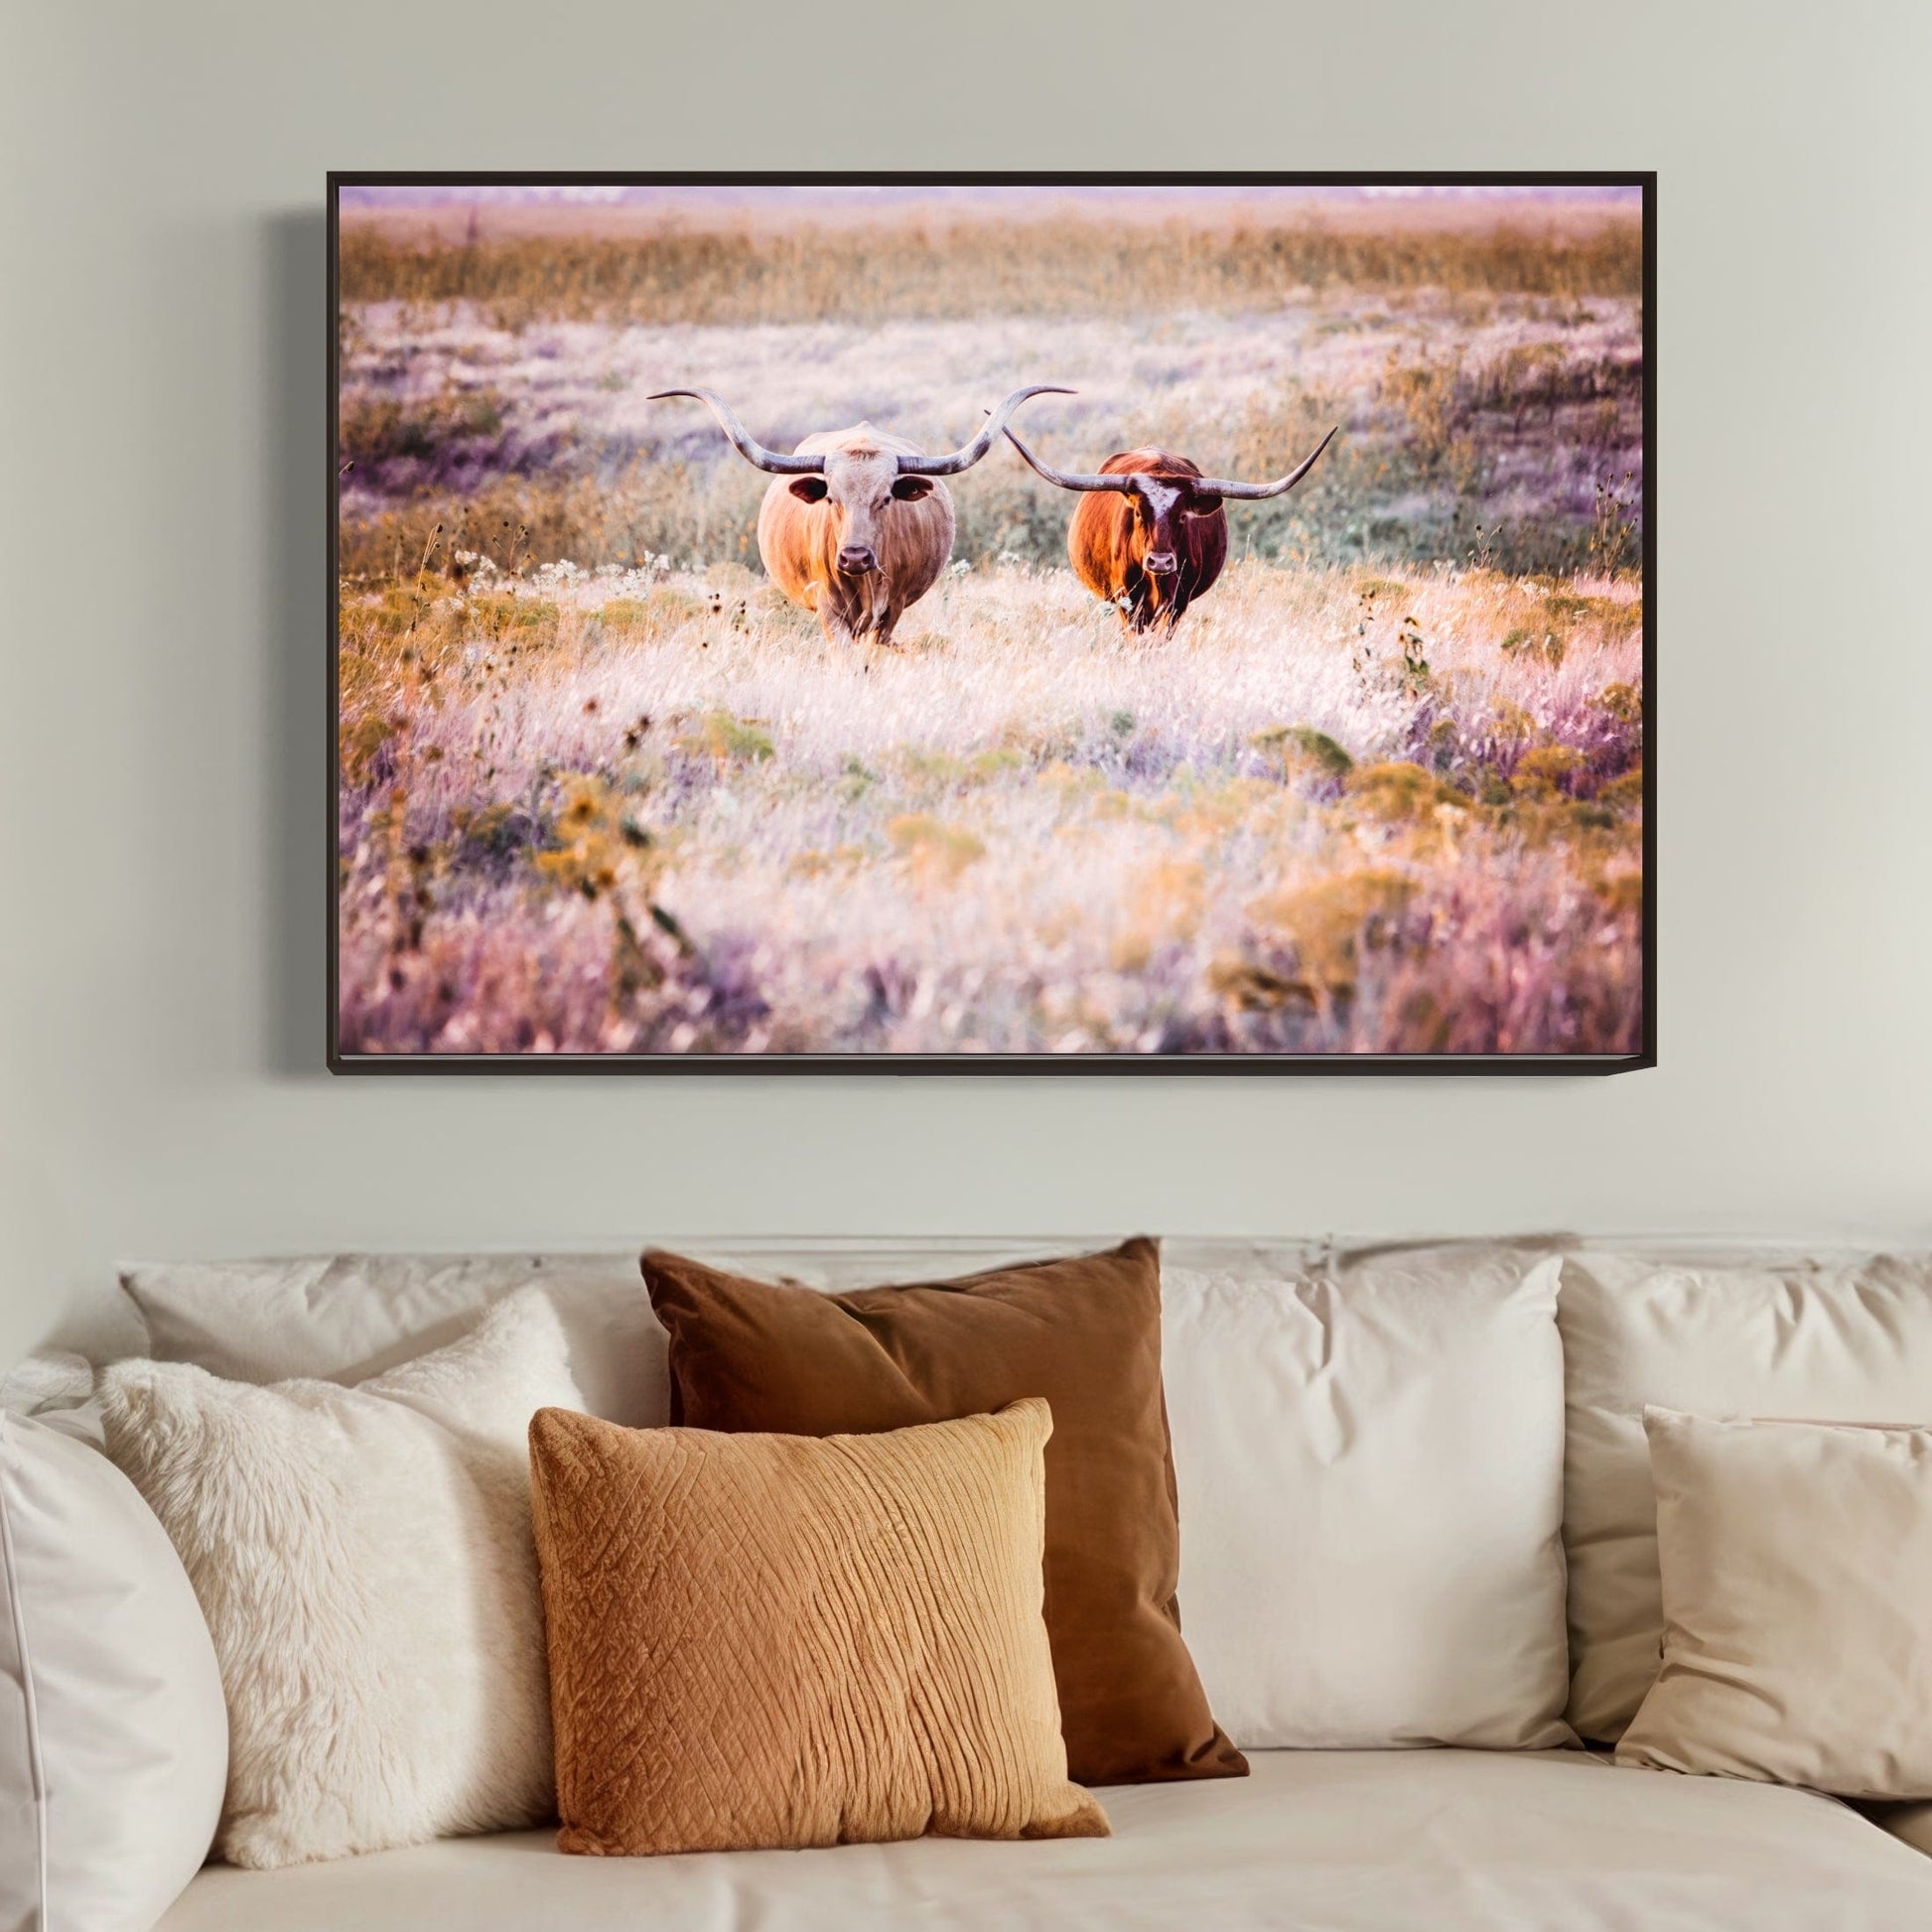 Texas Longhorn Cows in Colorful Pasture Grass Wall Art Teri James Photography